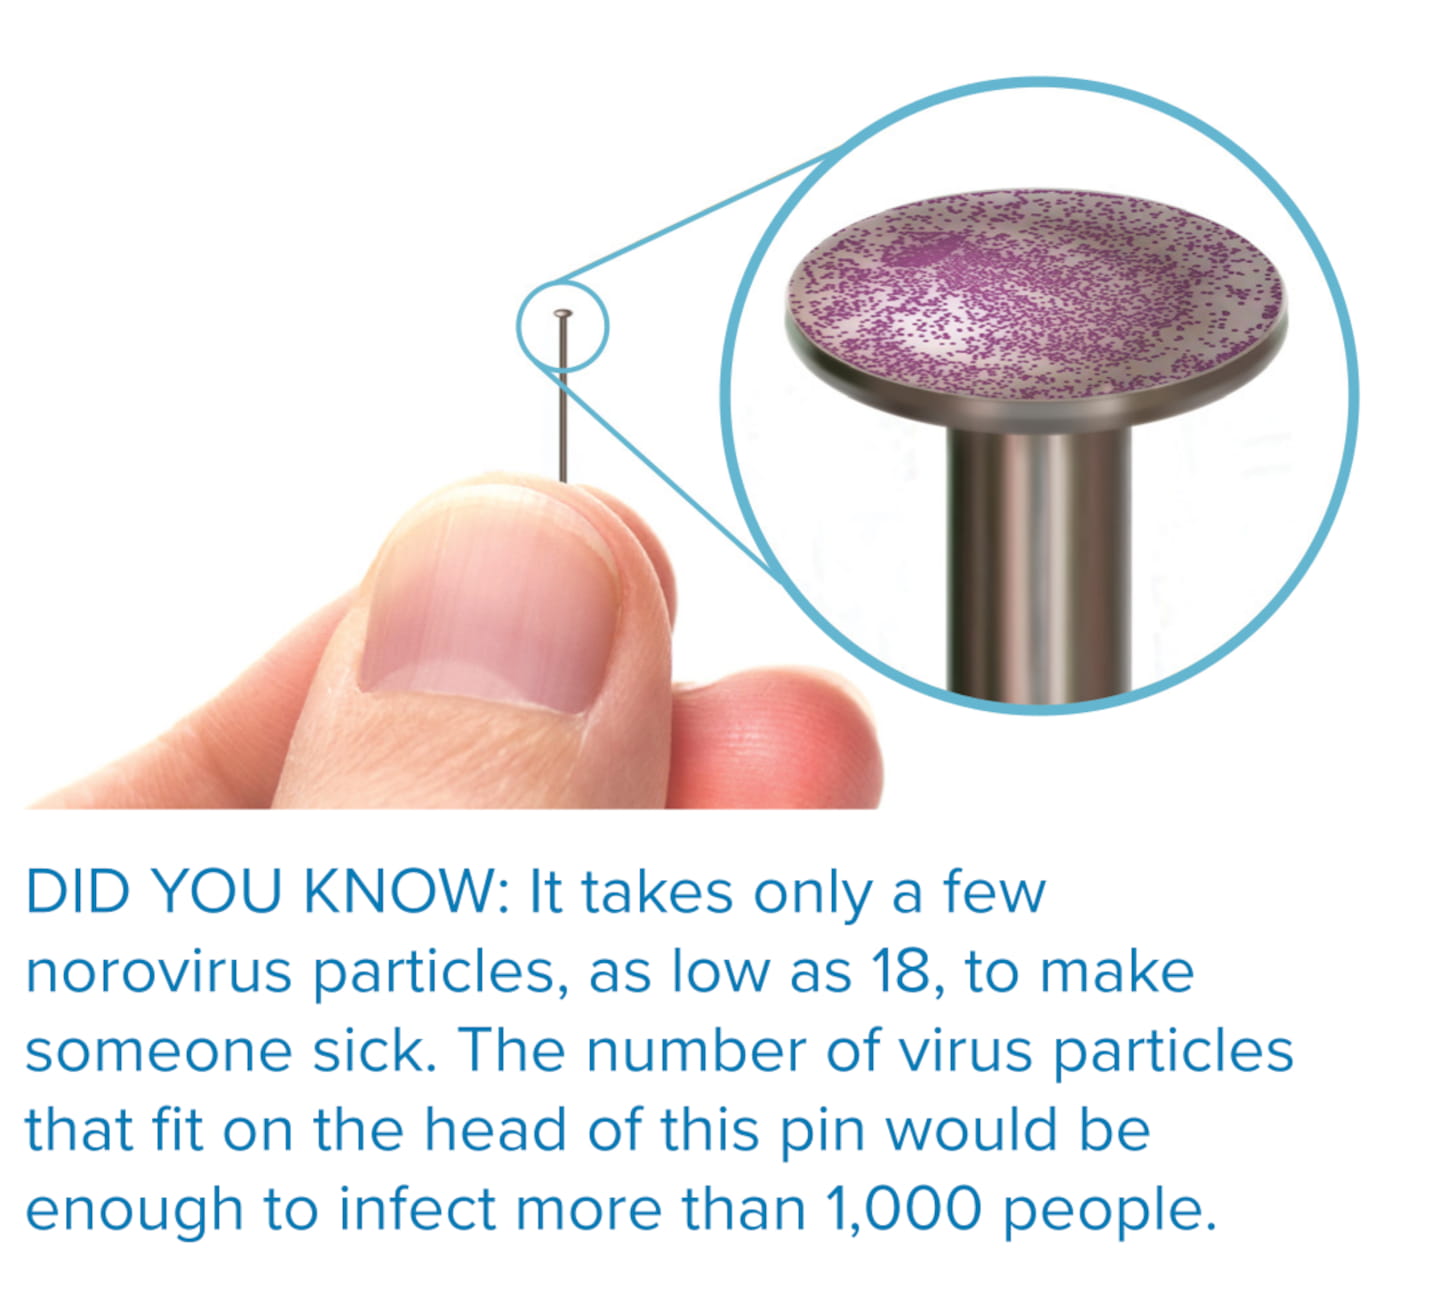 norovirus particles on pin